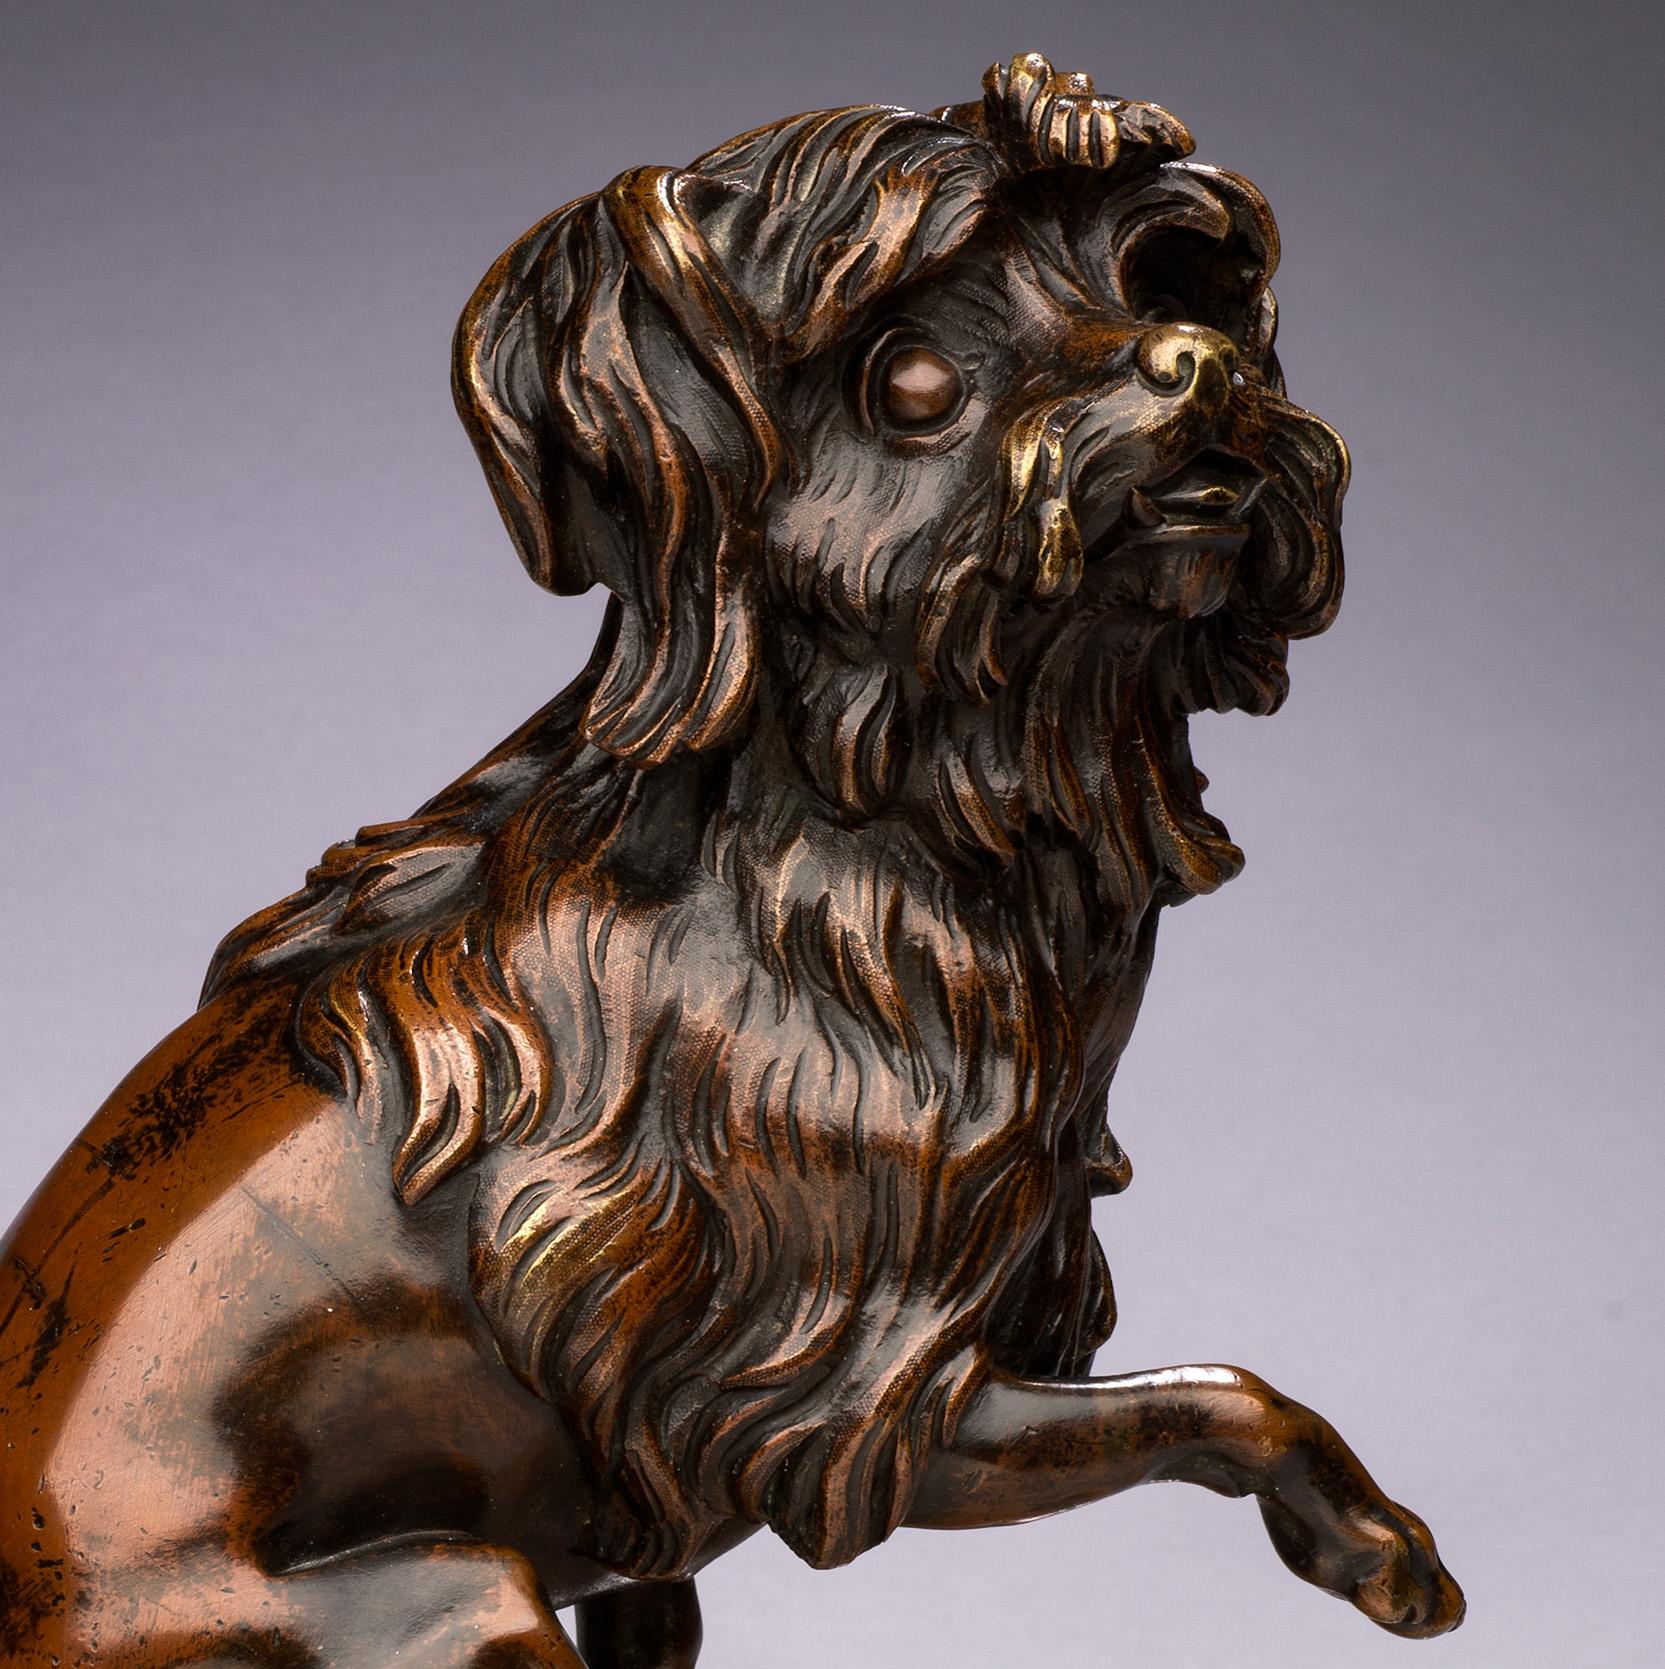 Antique Bronze Dog Portrait of a  Maltese on a Marble Base
French 19th century  
1/2 x 8 x 5 1/2 inches

The chiseled bronze has a nuanced, rich brown patina depicting a Maltese in the round, seated on a quadrangular marble base decorated with very